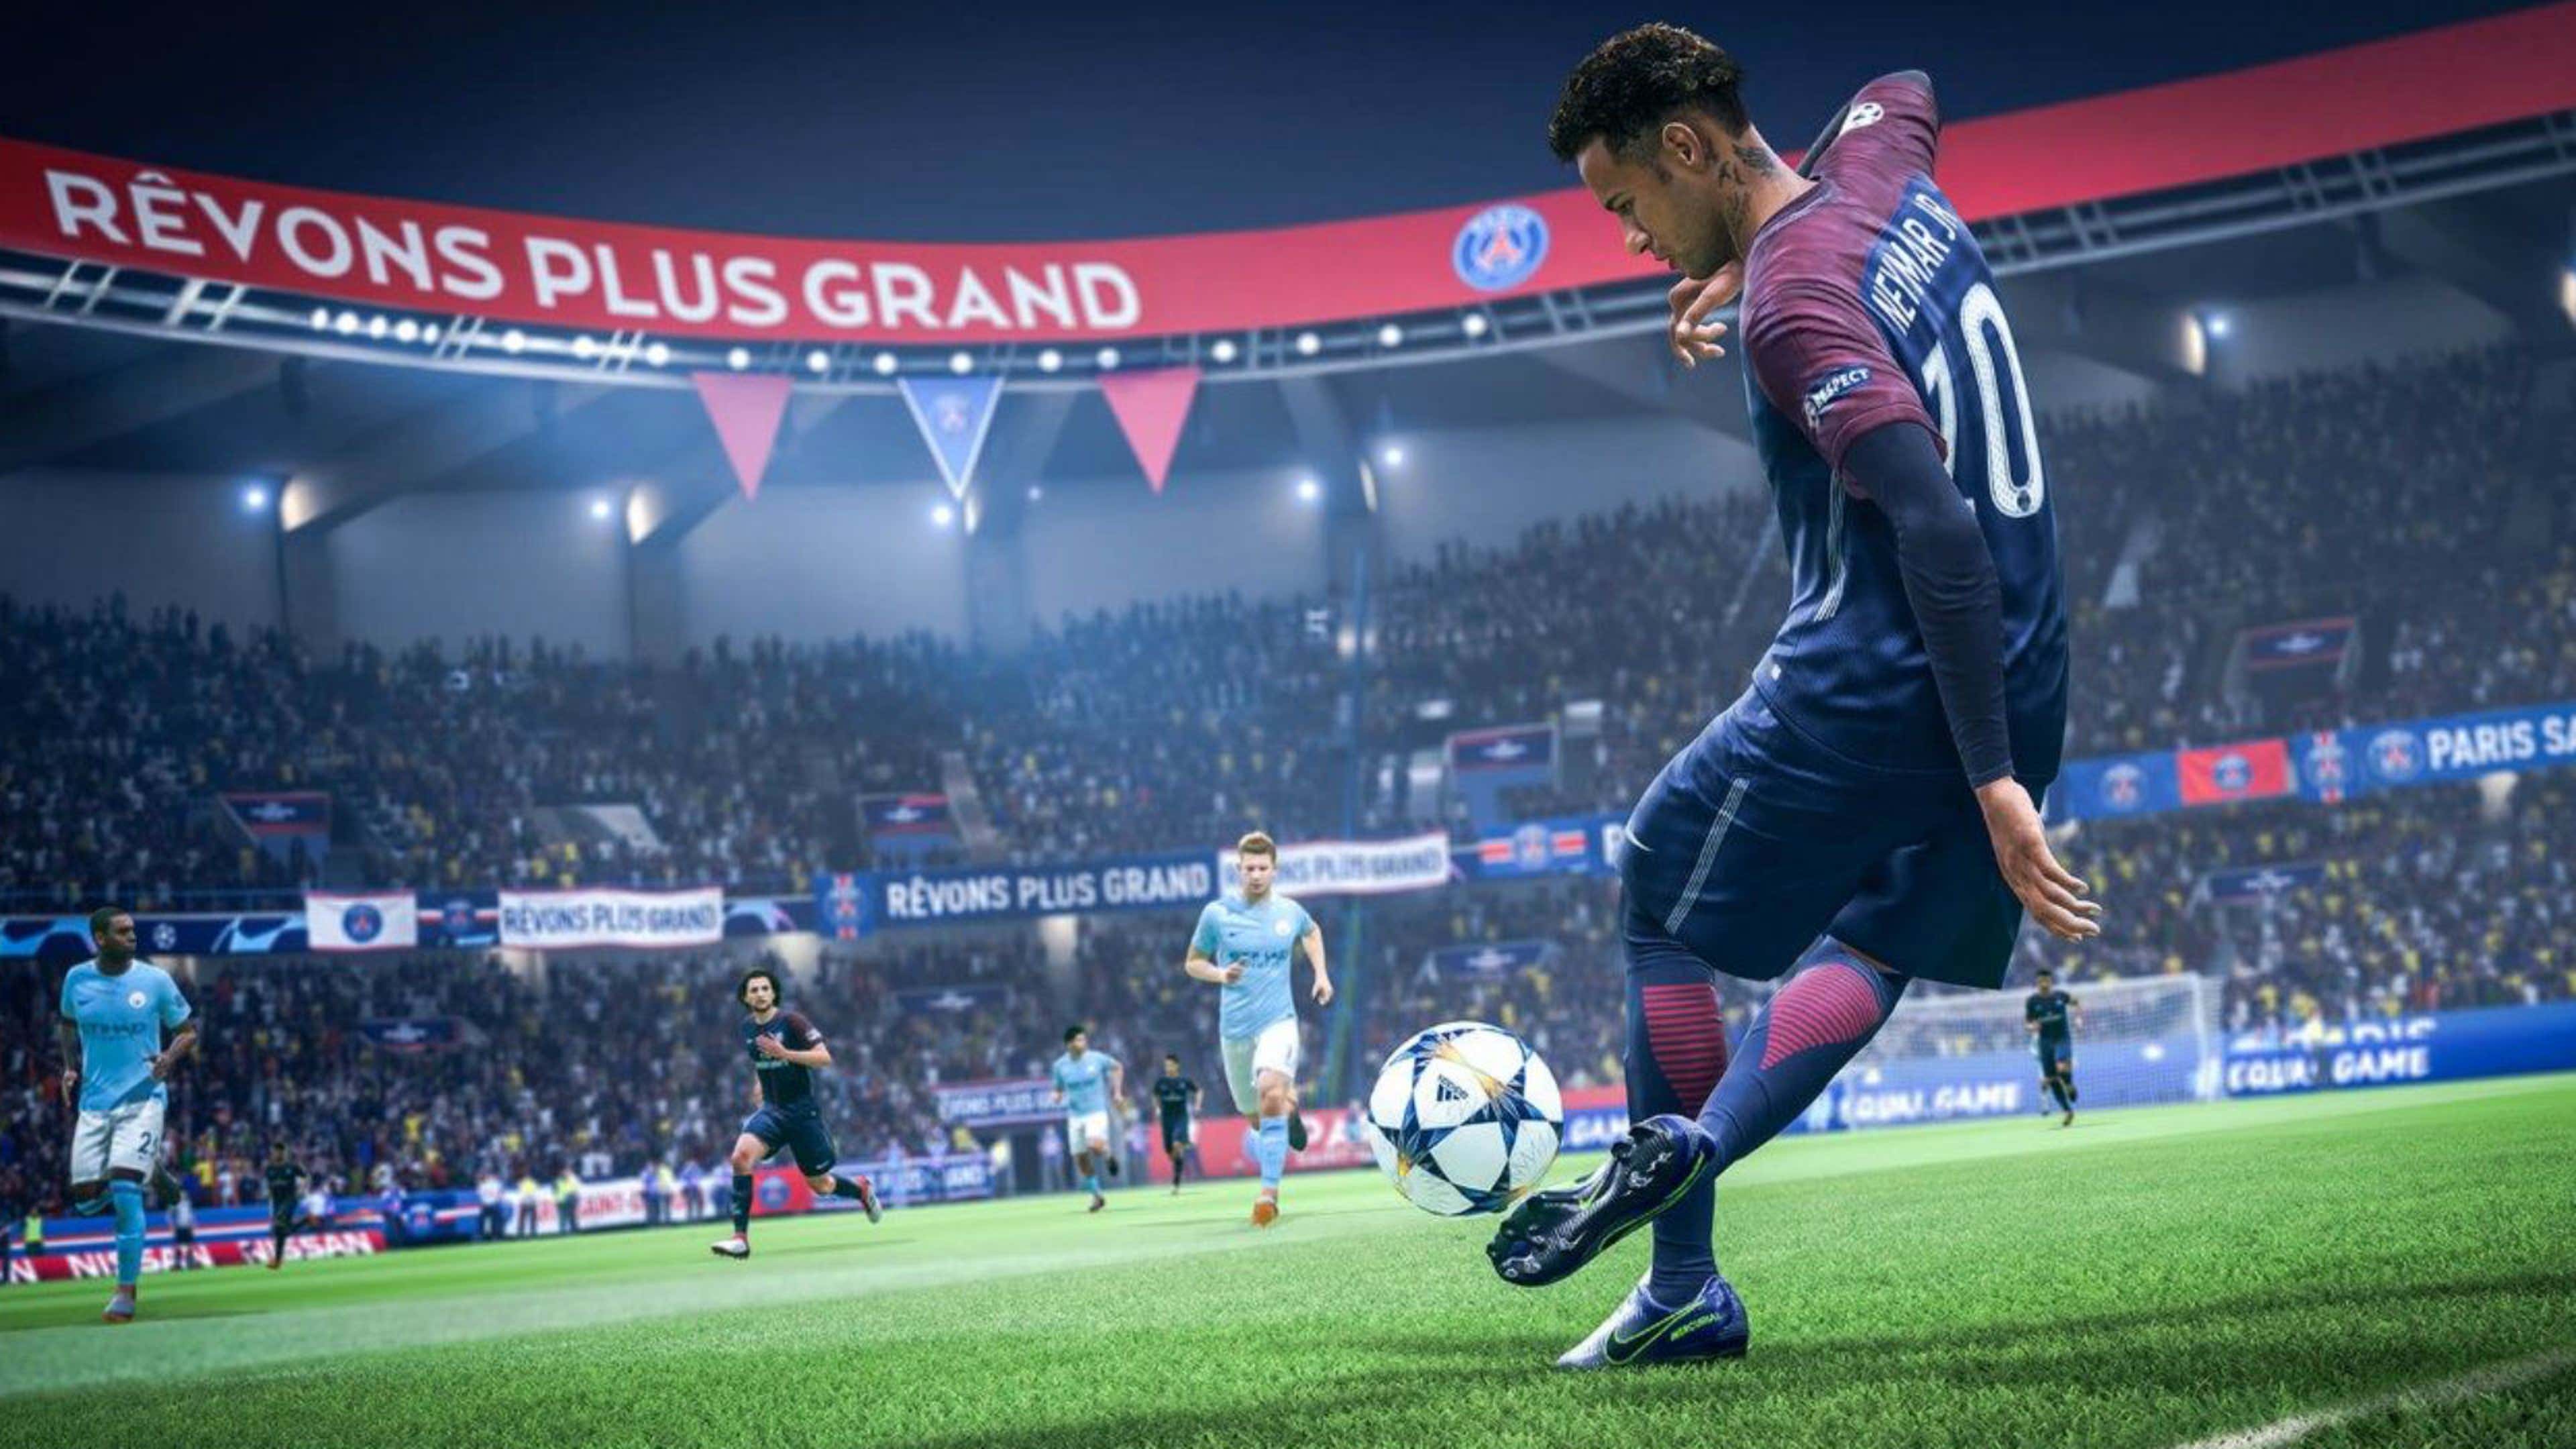 Dream League Soccer 2020 Has Launched as a Standalone Release